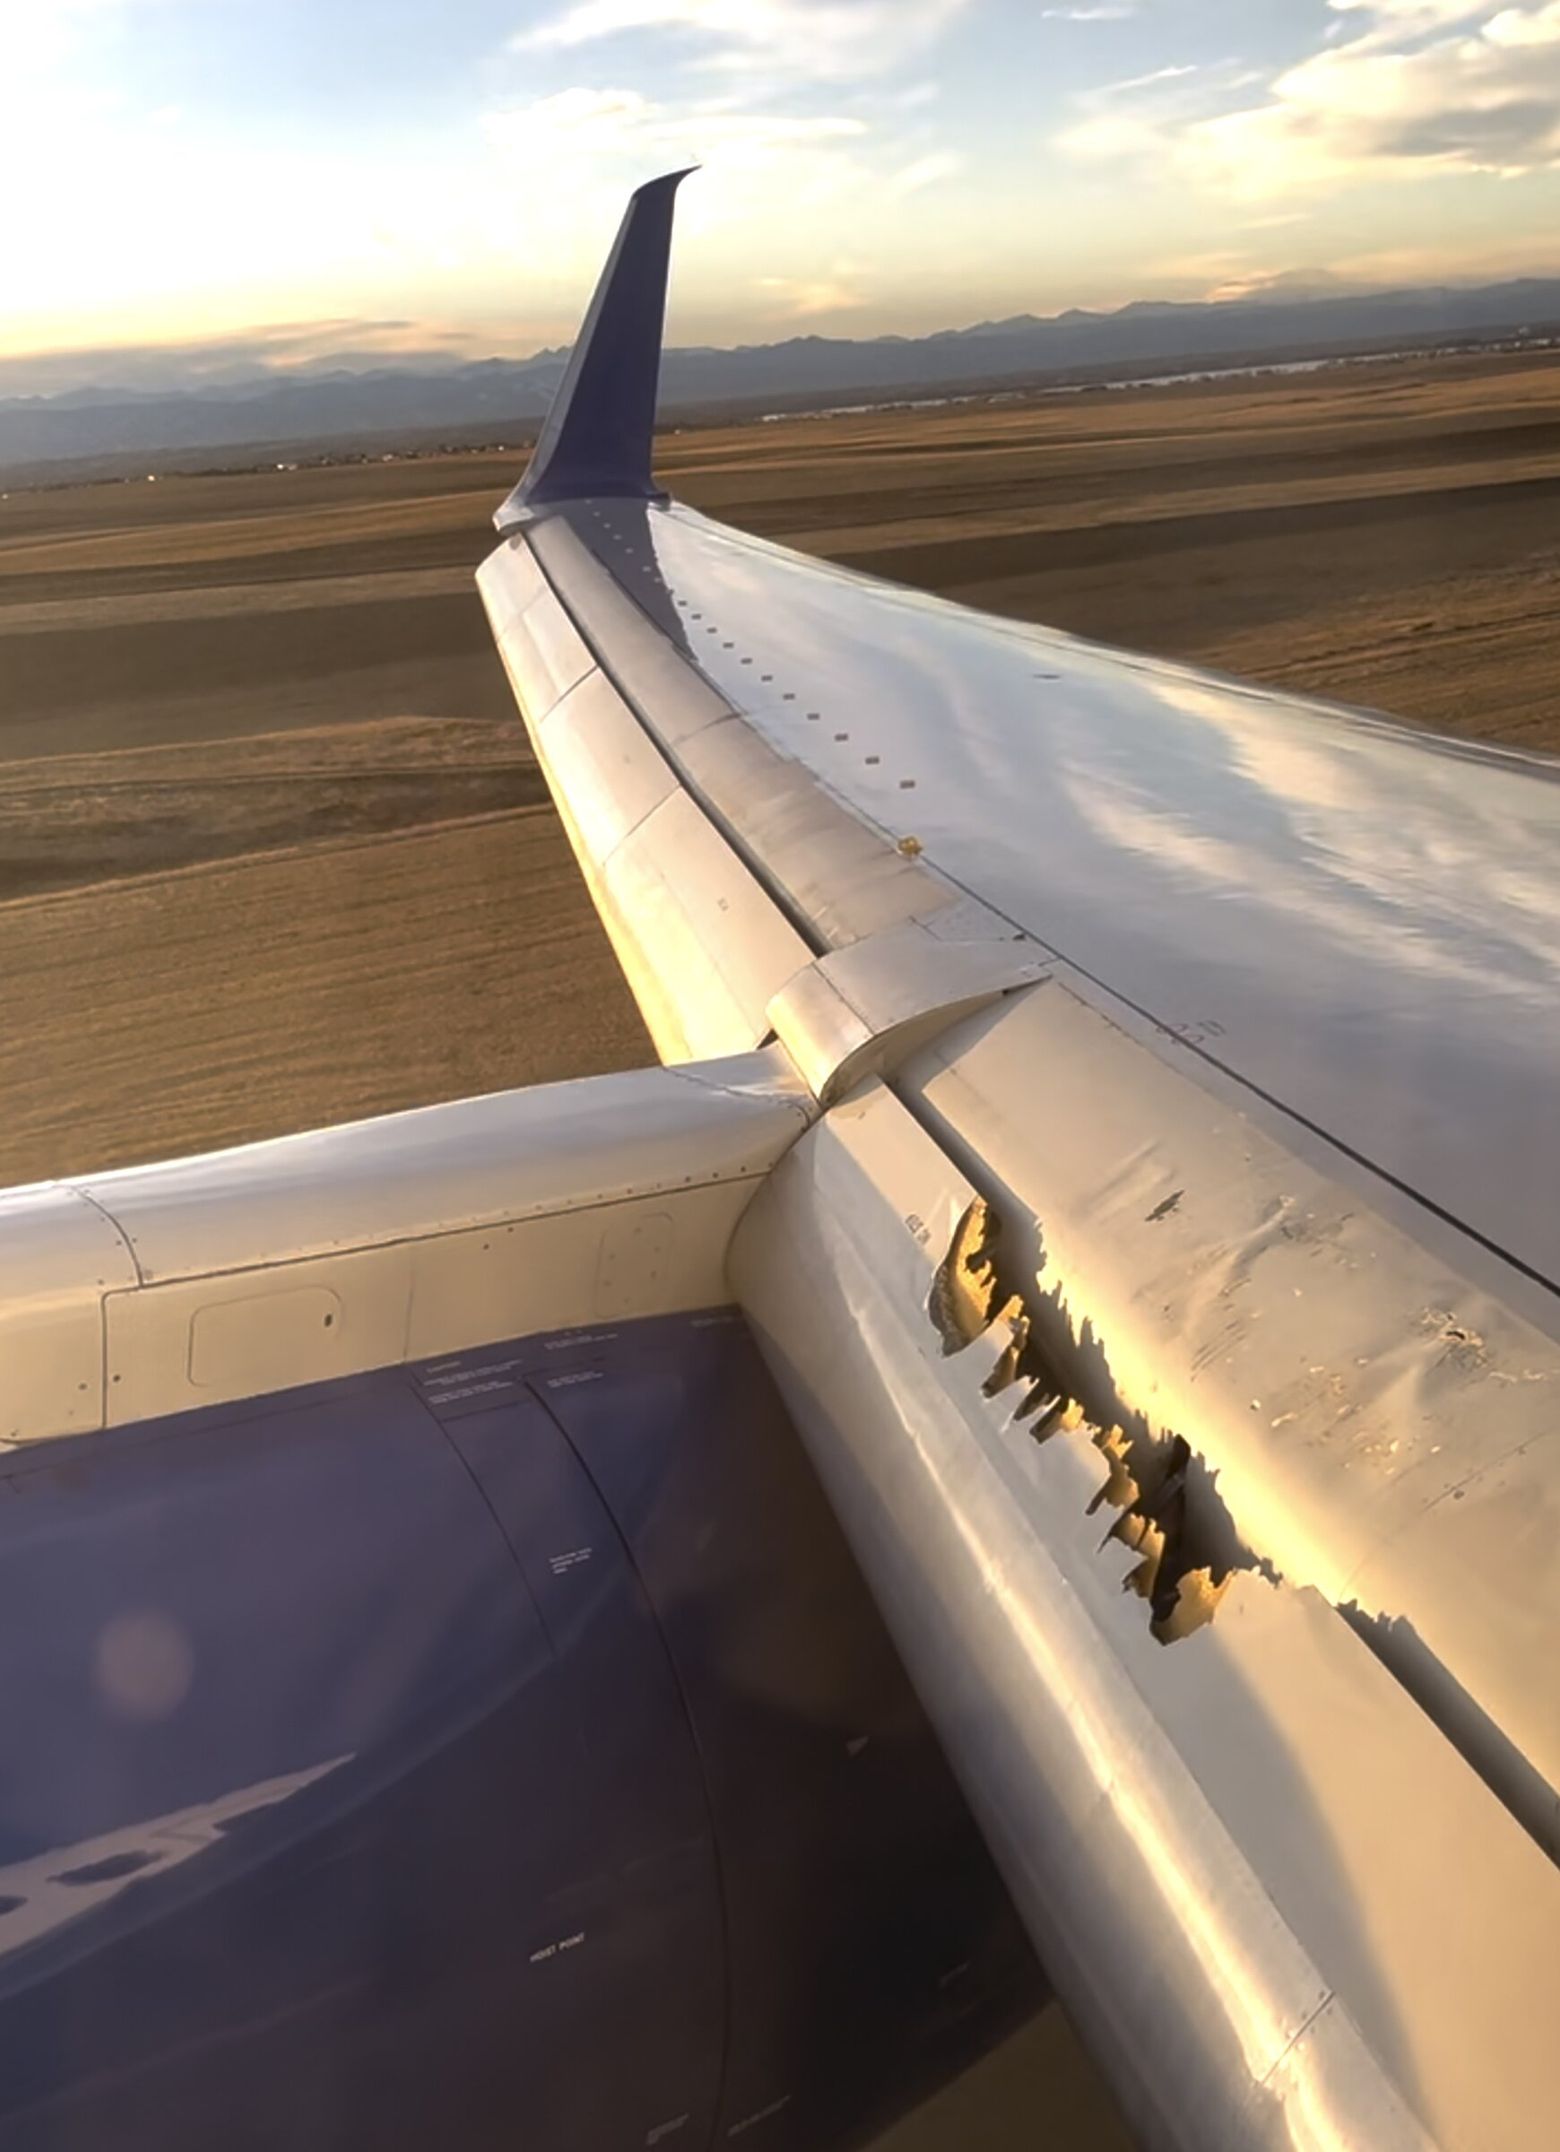 United flight from San Francisco to Boston diverted due to damage